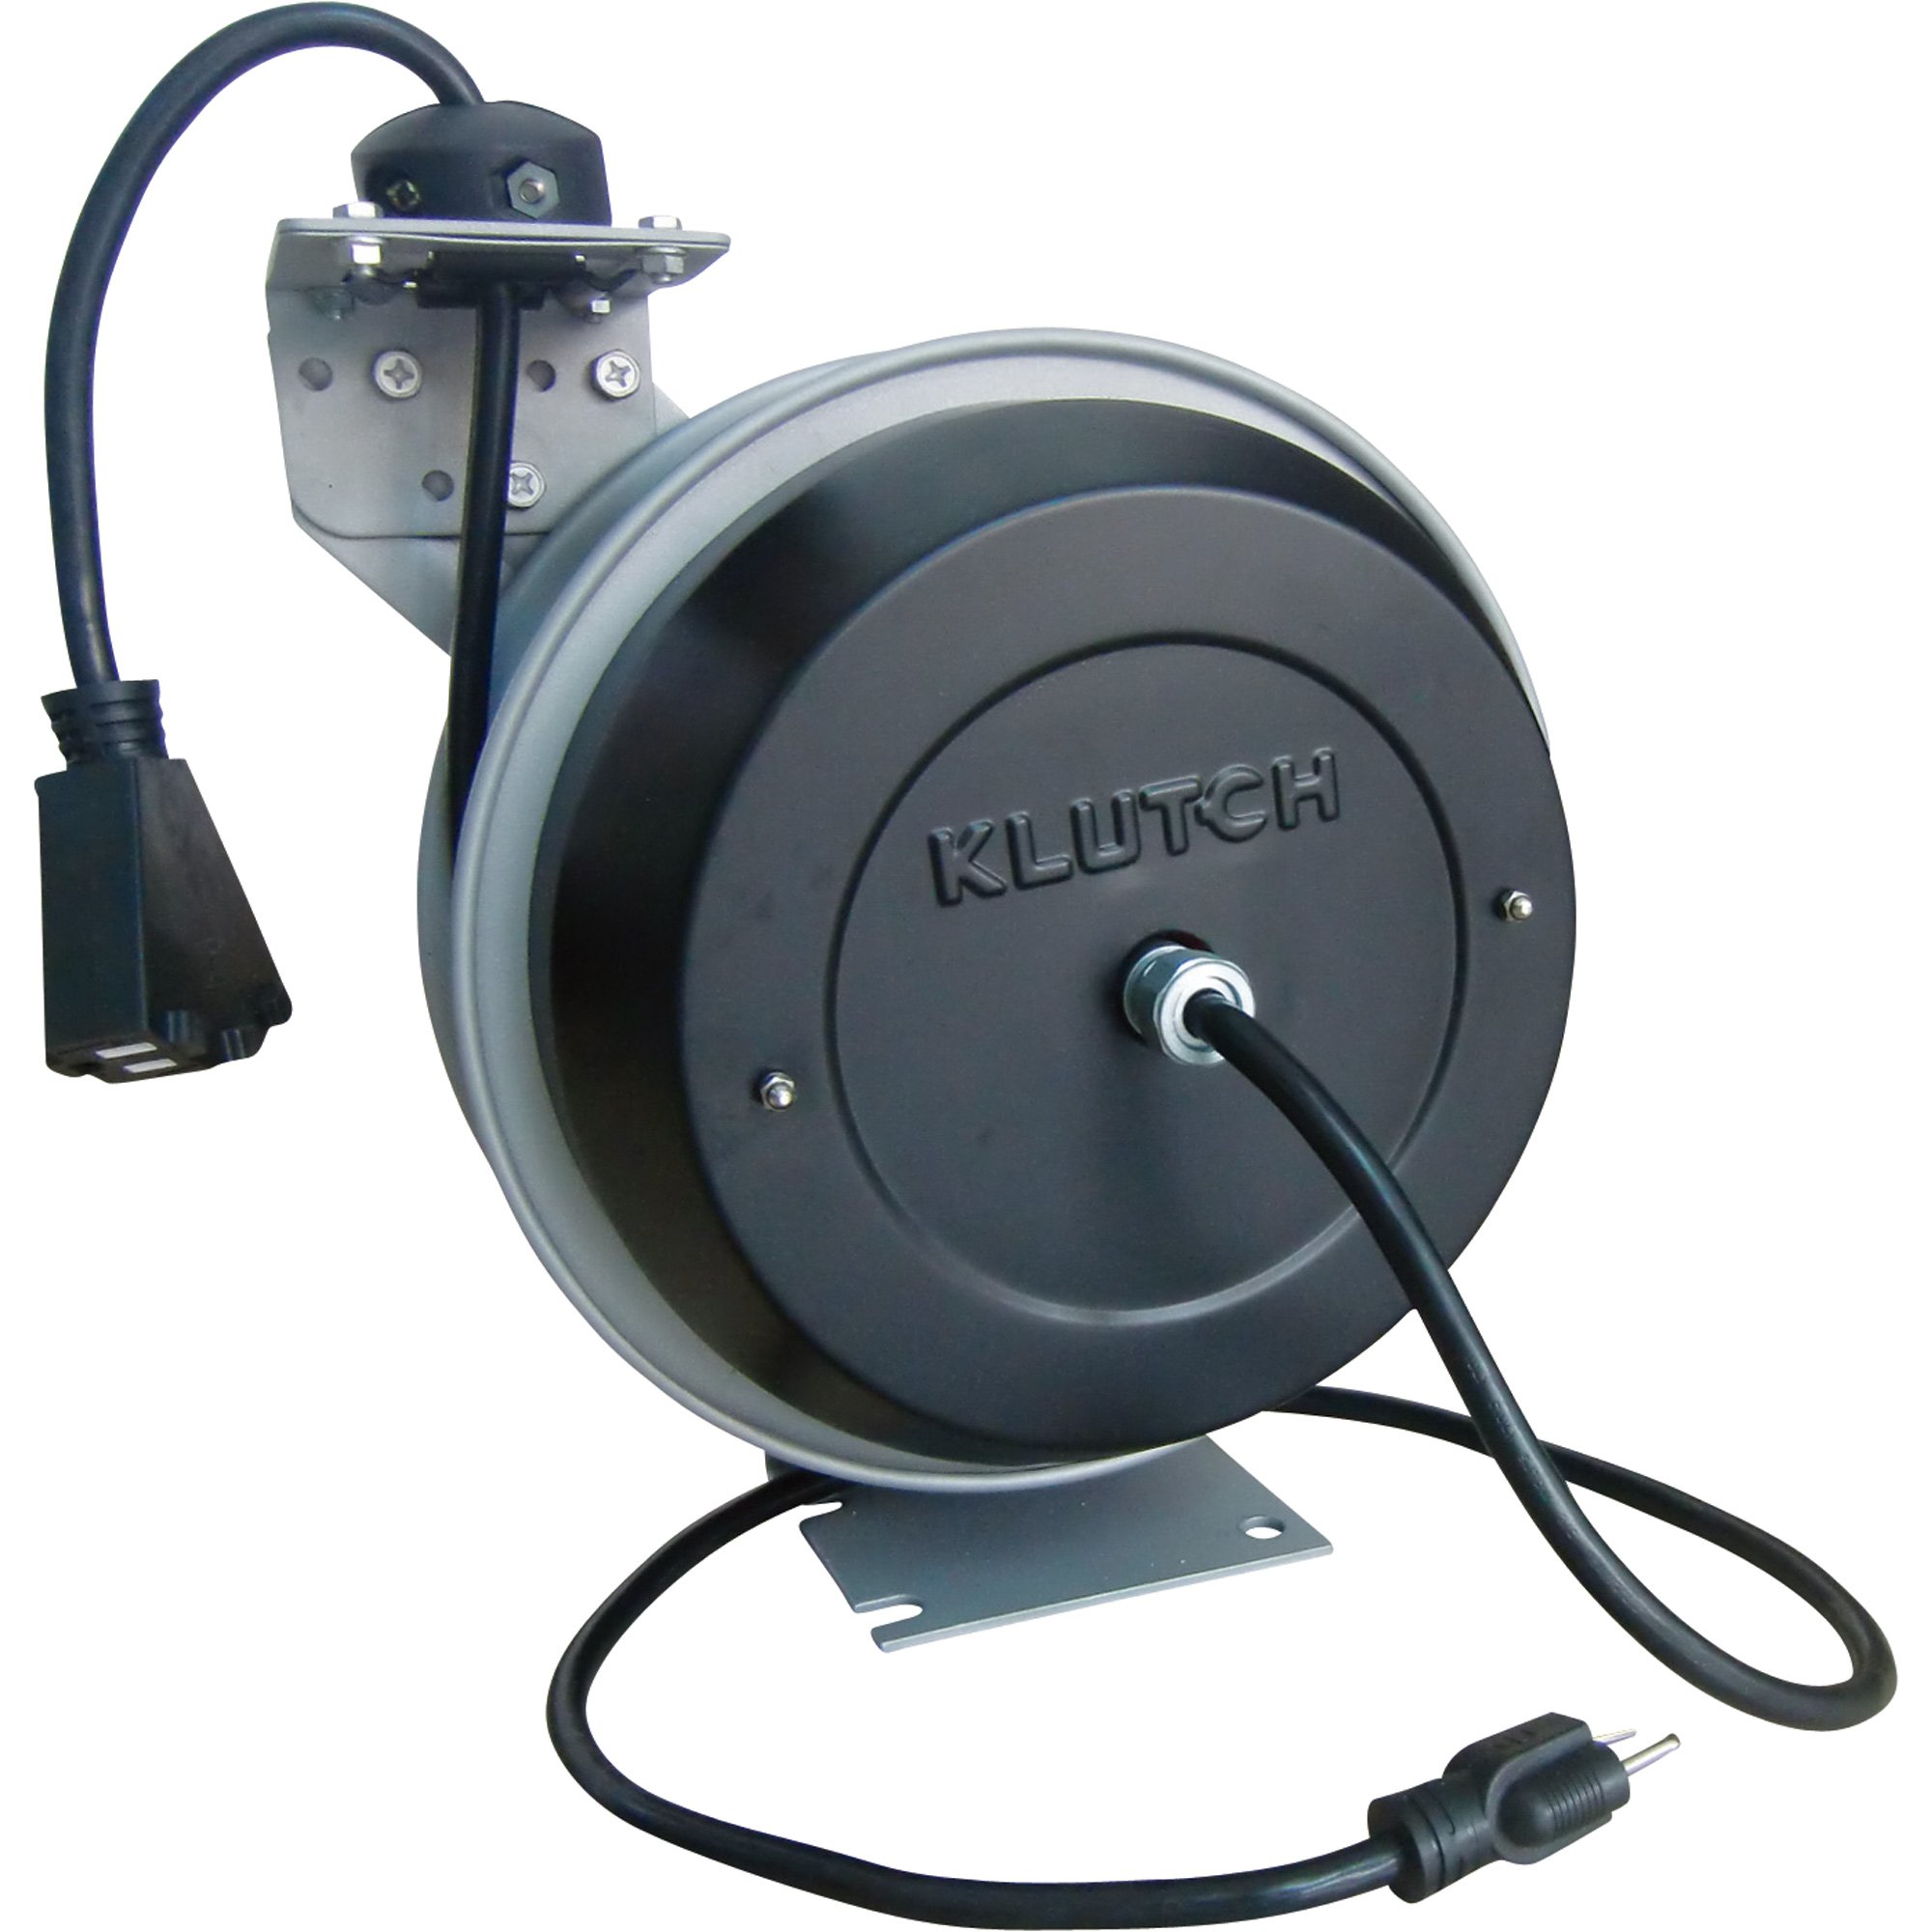 Please see replacement Item# 49582. Klutch Retractable Cord Reel — 50ft.,  12/3 Cord, 15 Amps, Model# 21702001